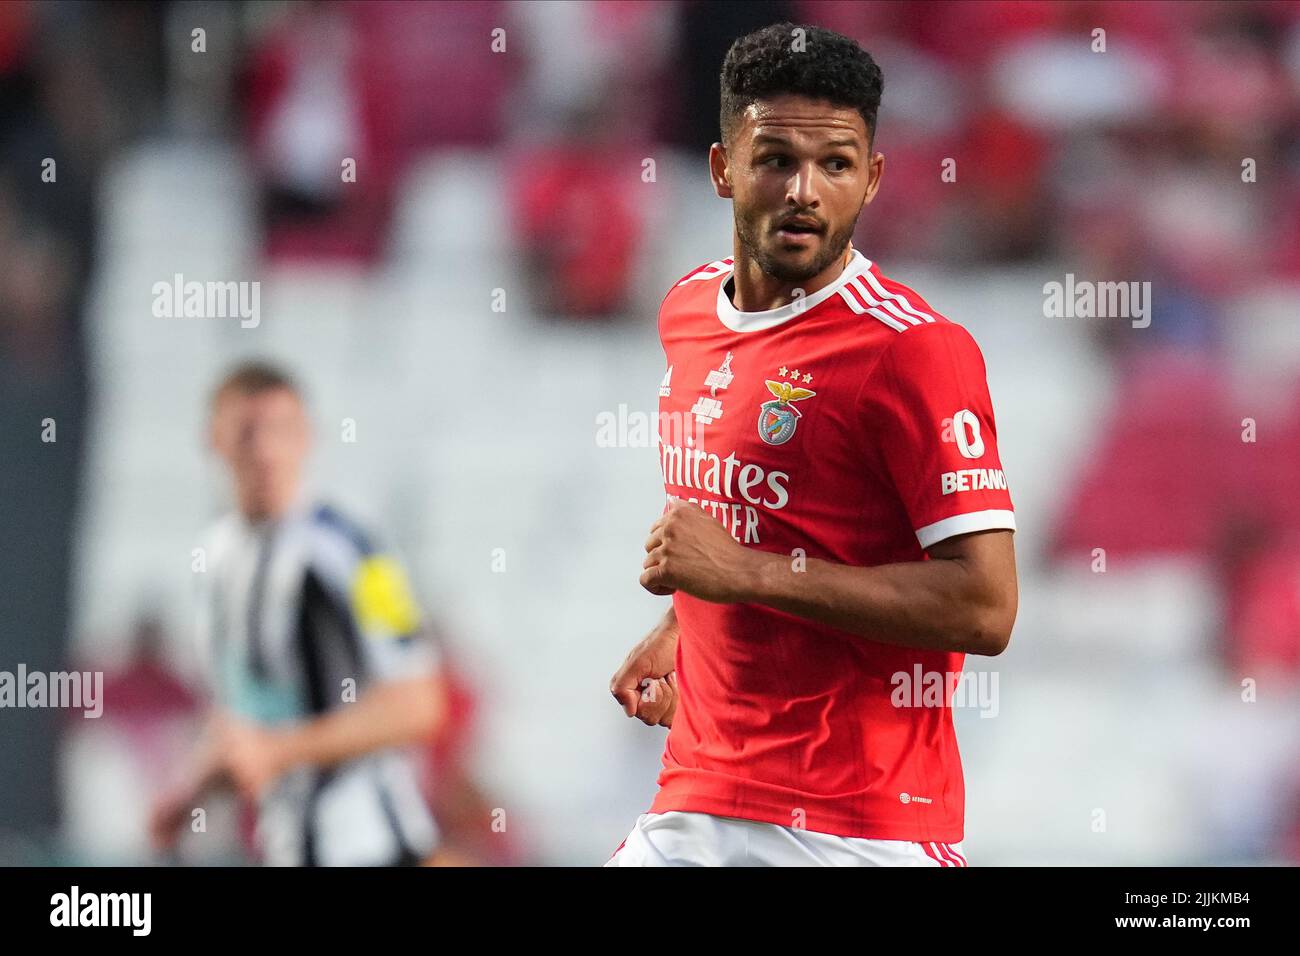 Lisbon, Portugal. July 25, 2022, Goncalo Ramos of Benfica during the Pre-Season Friendly Eusebio Cup match between SL Benfica and Newcastle United FC played at Estadio da Luz on July 25, 2022 in Lisbon, Portugal. (Photo by Bagu Blanco / PRESSINPHOTO) Stock Photo